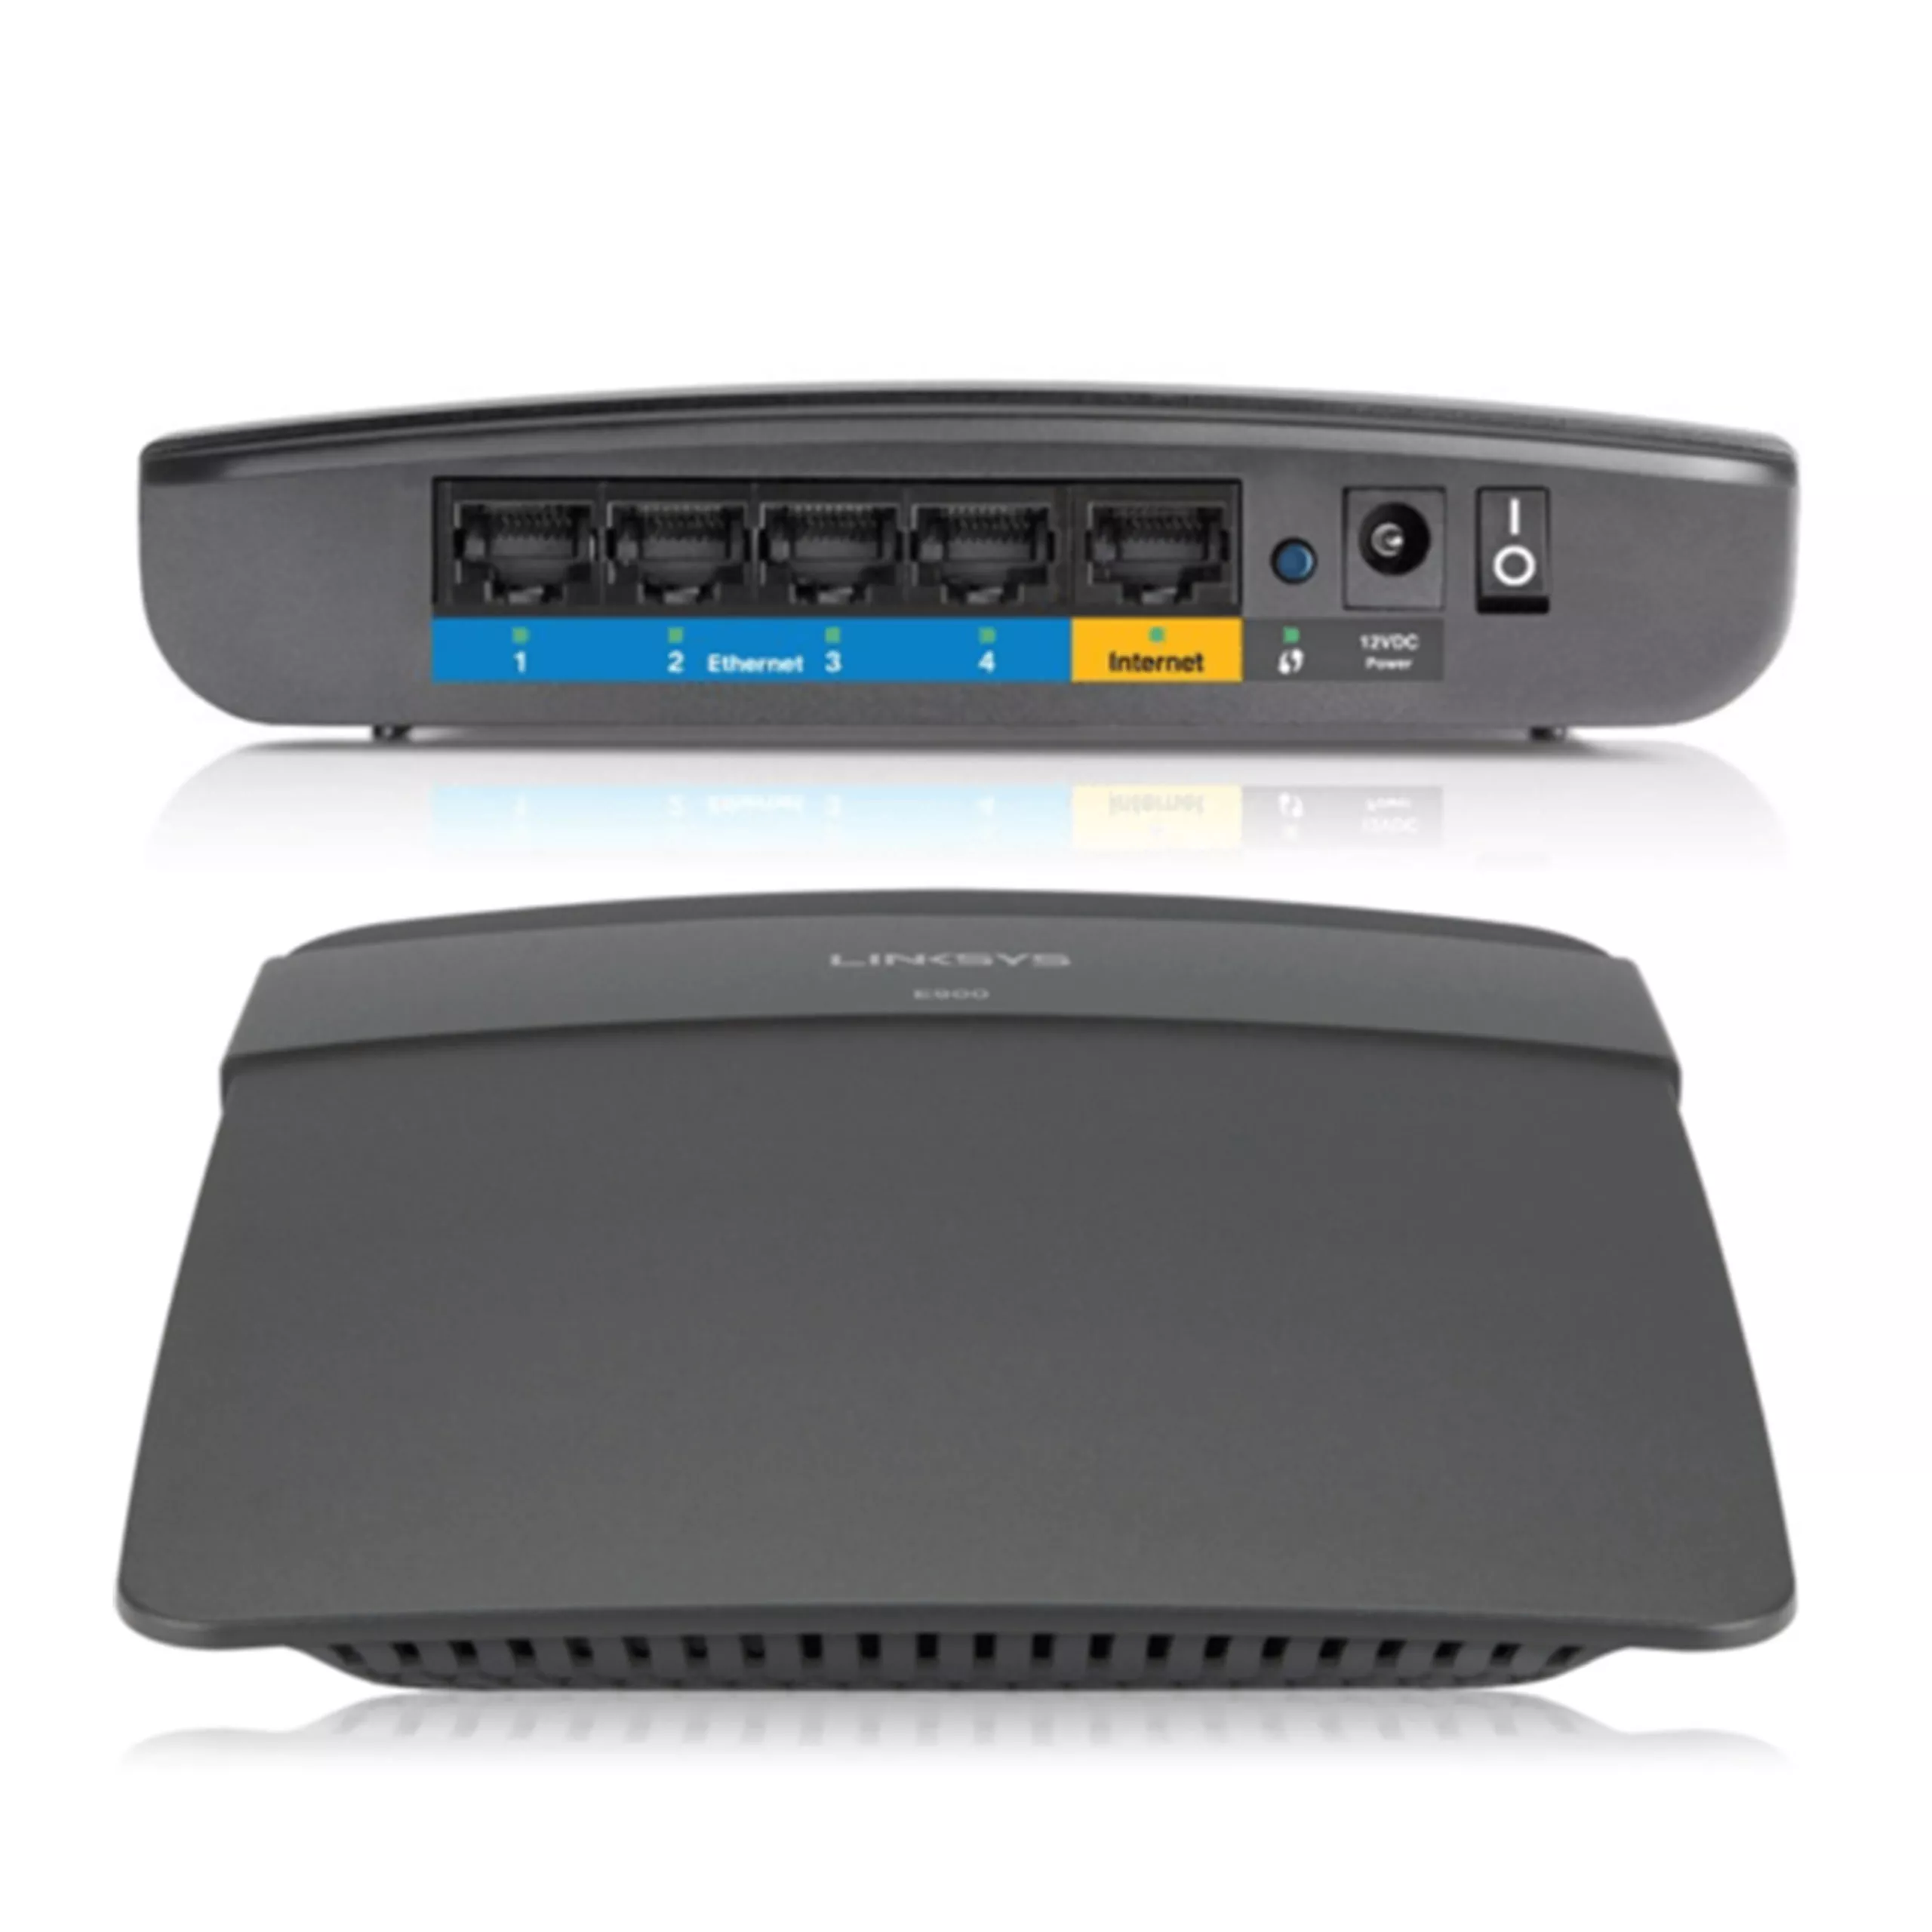 https://www.xgamertechnologies.com/images/products/Cisco Linksys E900 Refurbished Wireless Router.webp